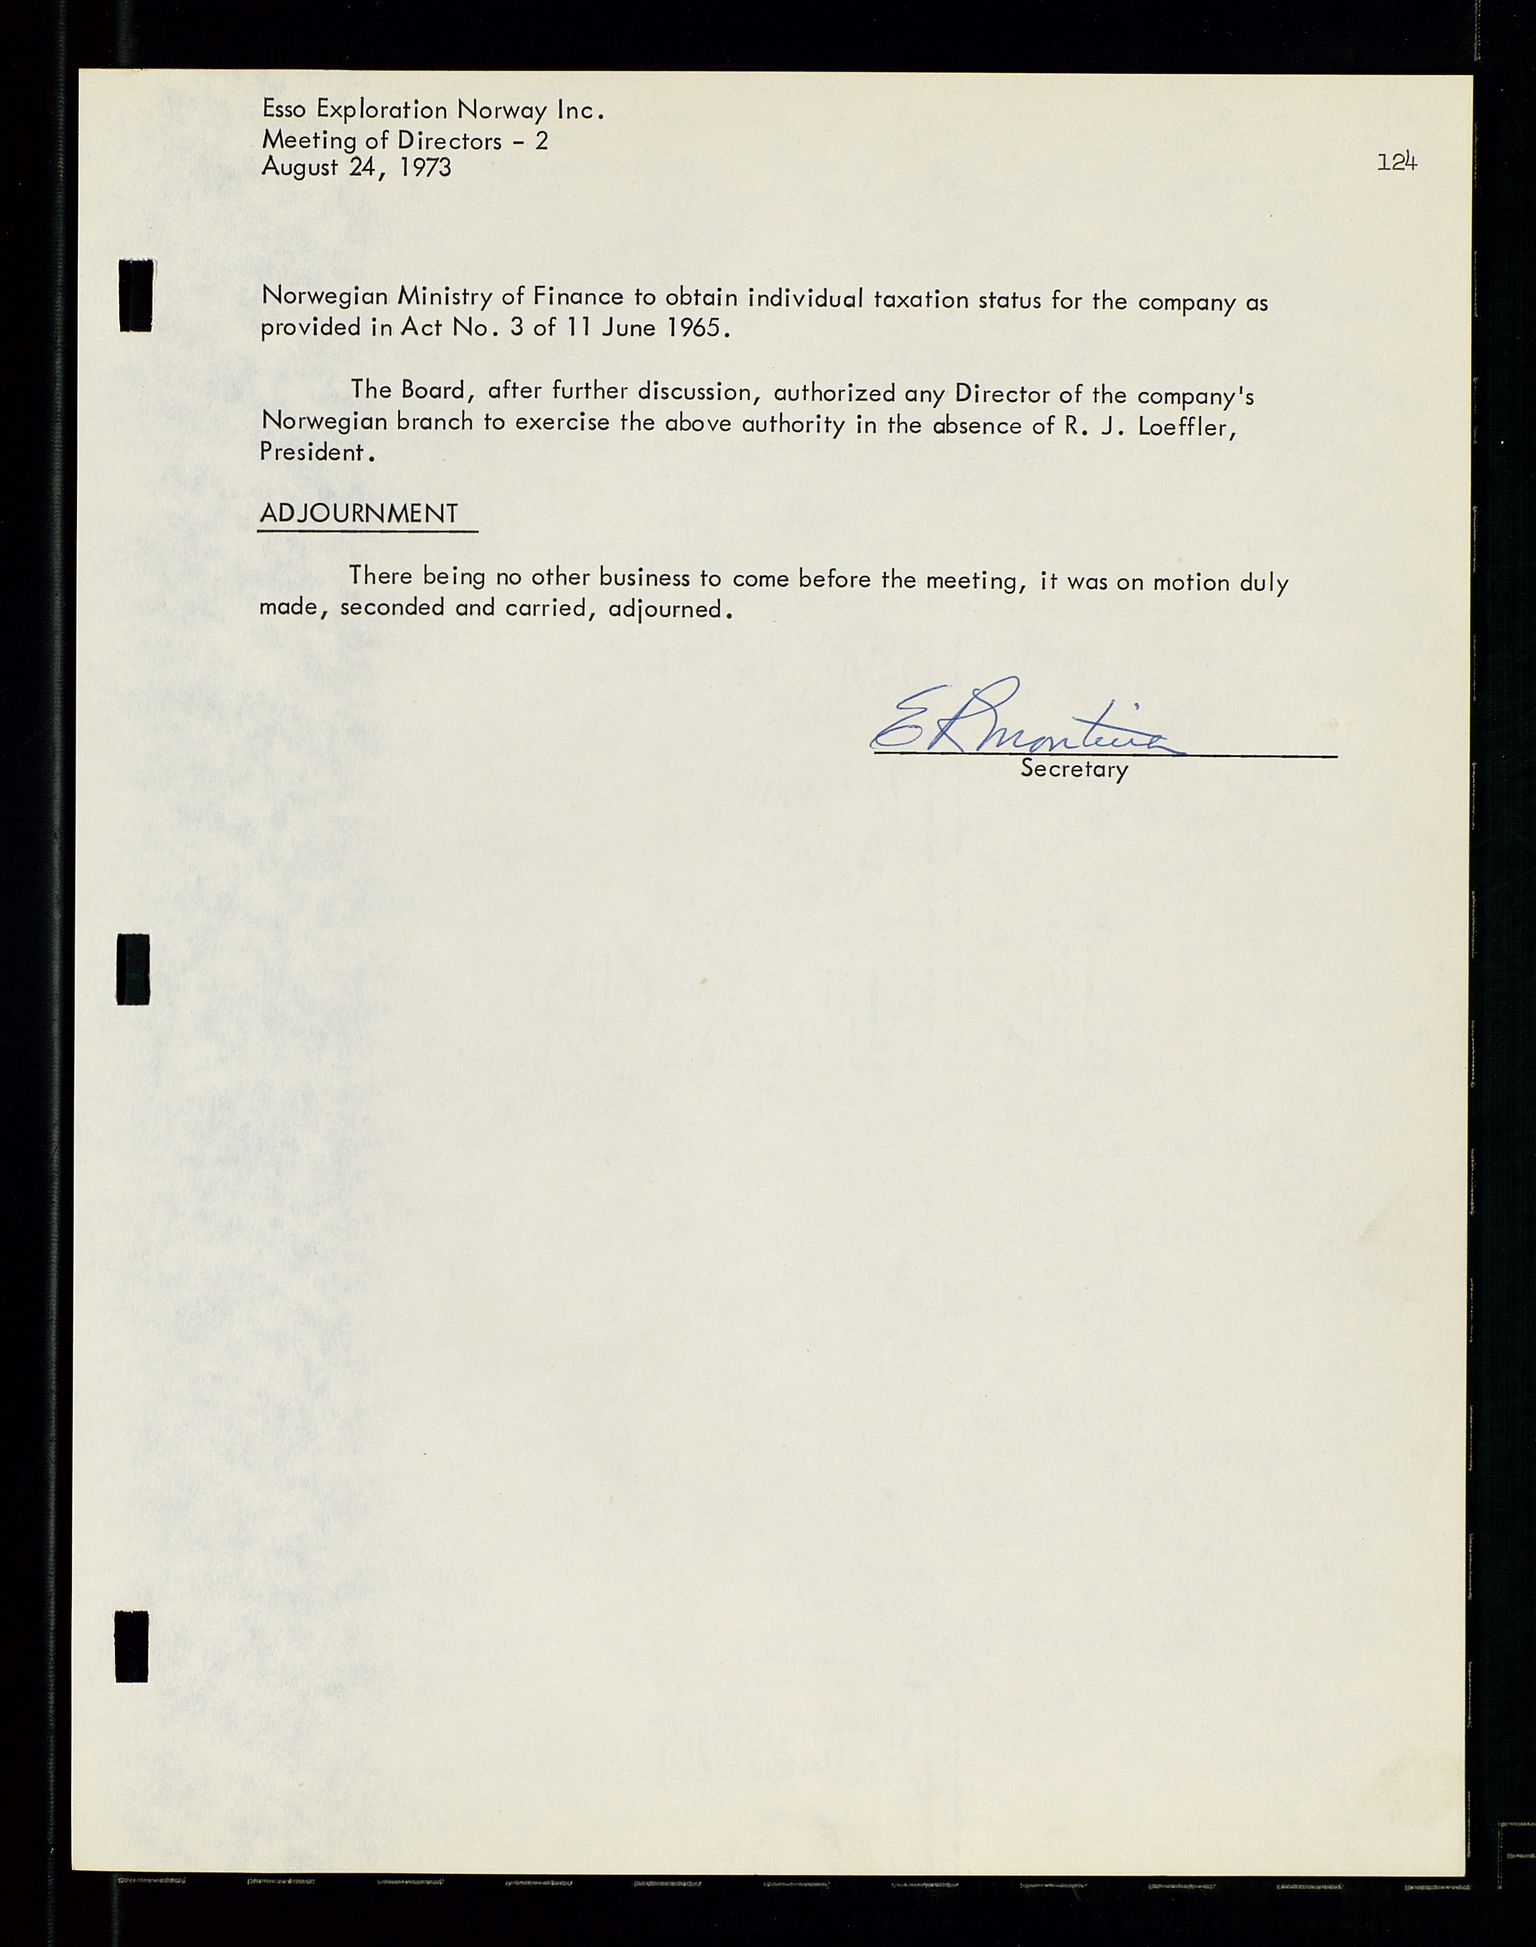 Pa 1512 - Esso Exploration and Production Norway Inc., SAST/A-101917/A/Aa/L0001/0001: Styredokumenter / Corporate records, By-Laws, Board meeting minutes, Incorporations, 1965-1975, s. 124